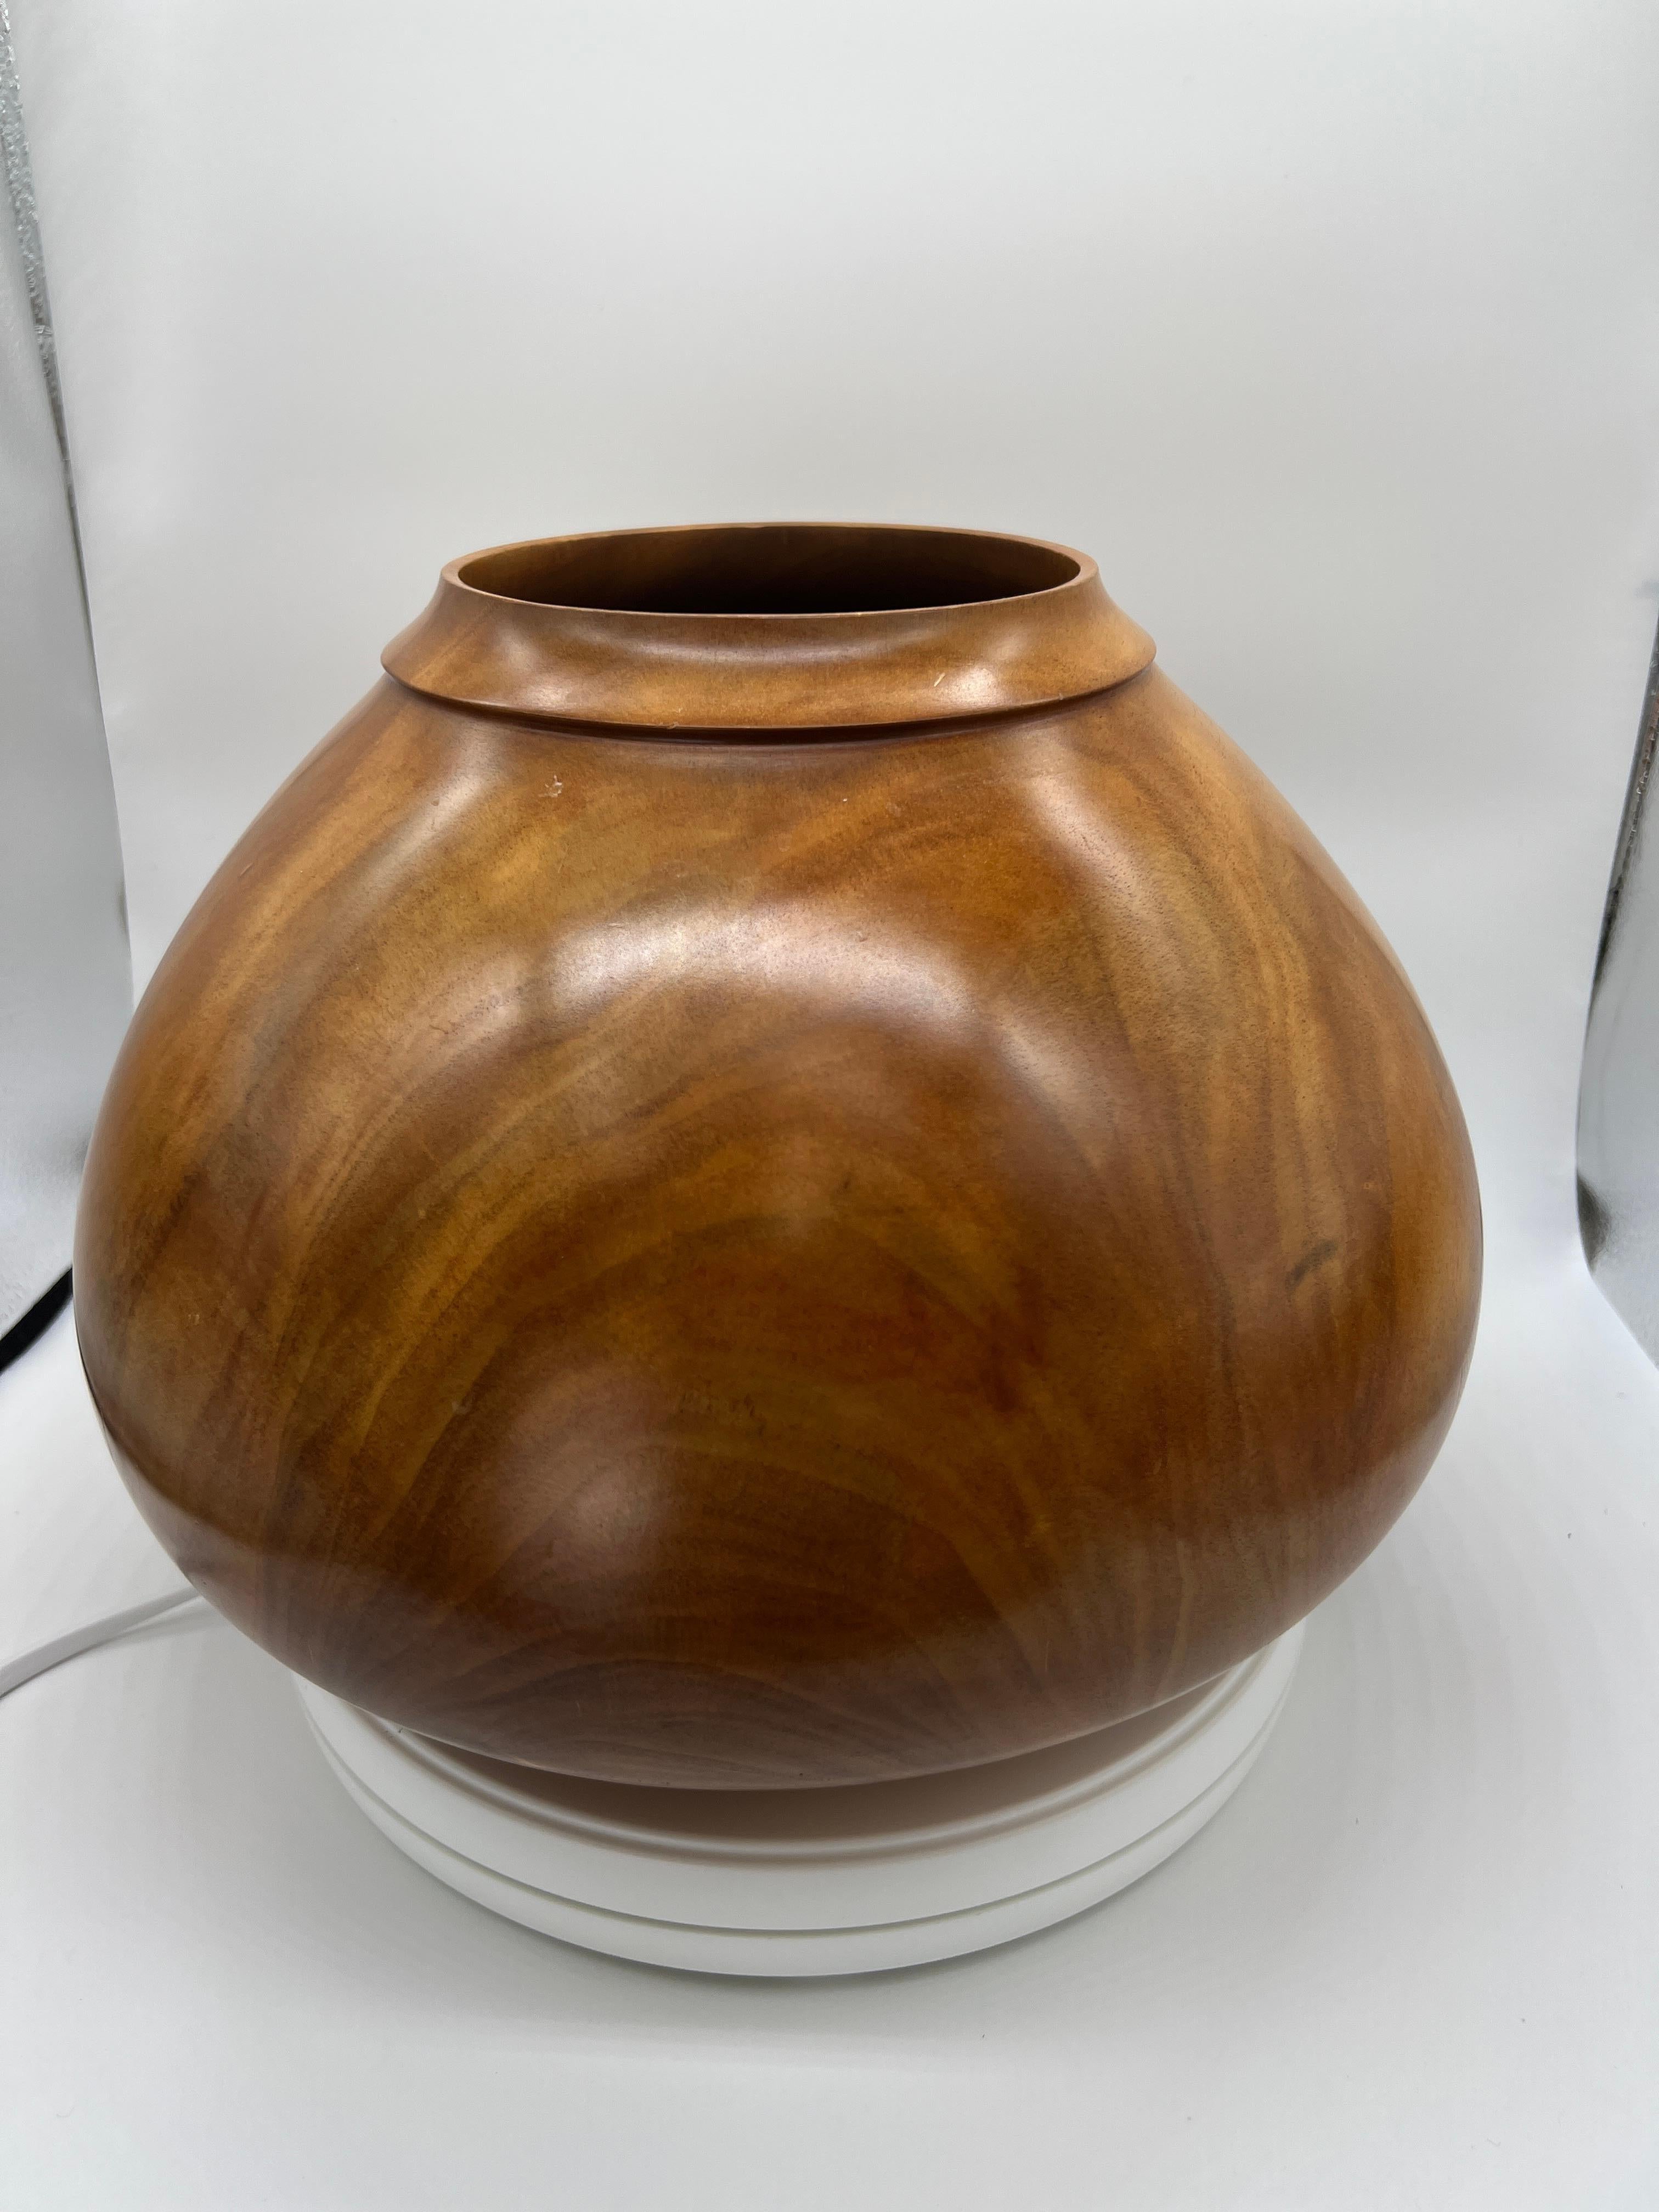 Lovely large wood turned bowl by mid-century wood artist Kevin Parks.  12.5